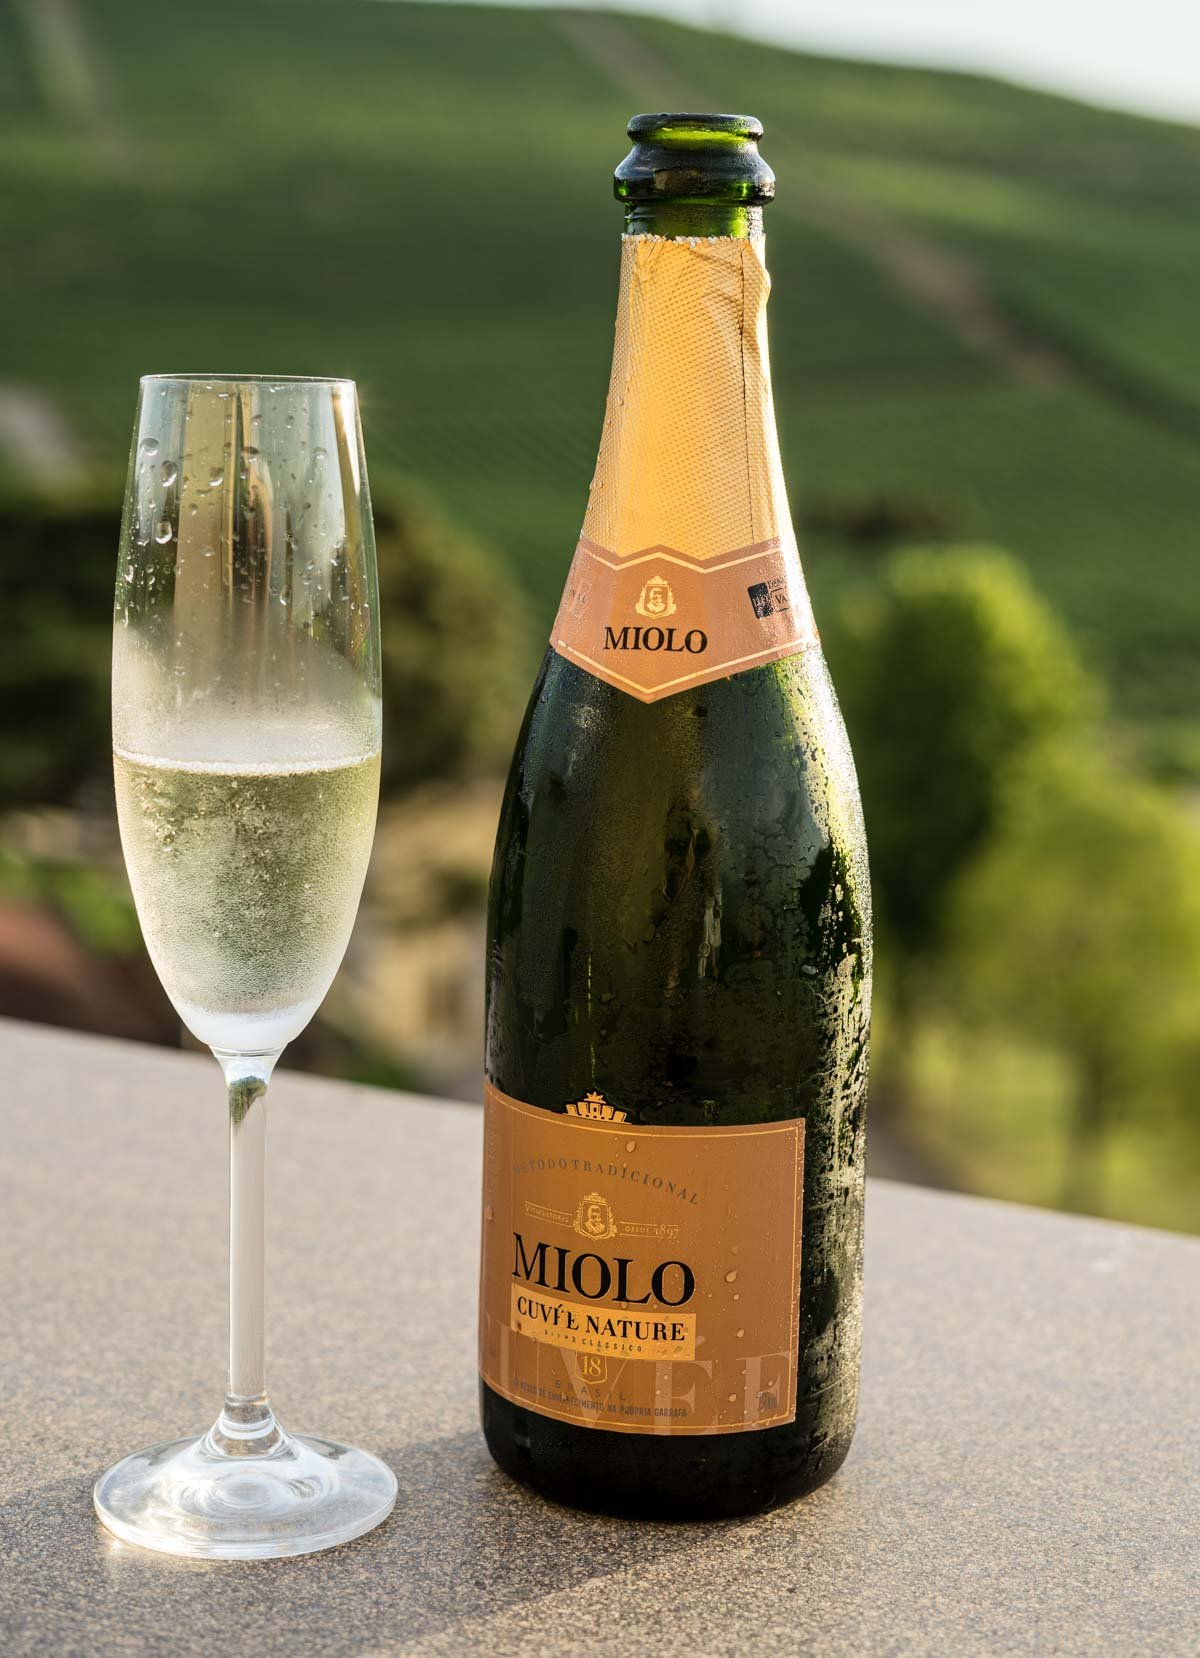 Miolo sparkling wine and glass.